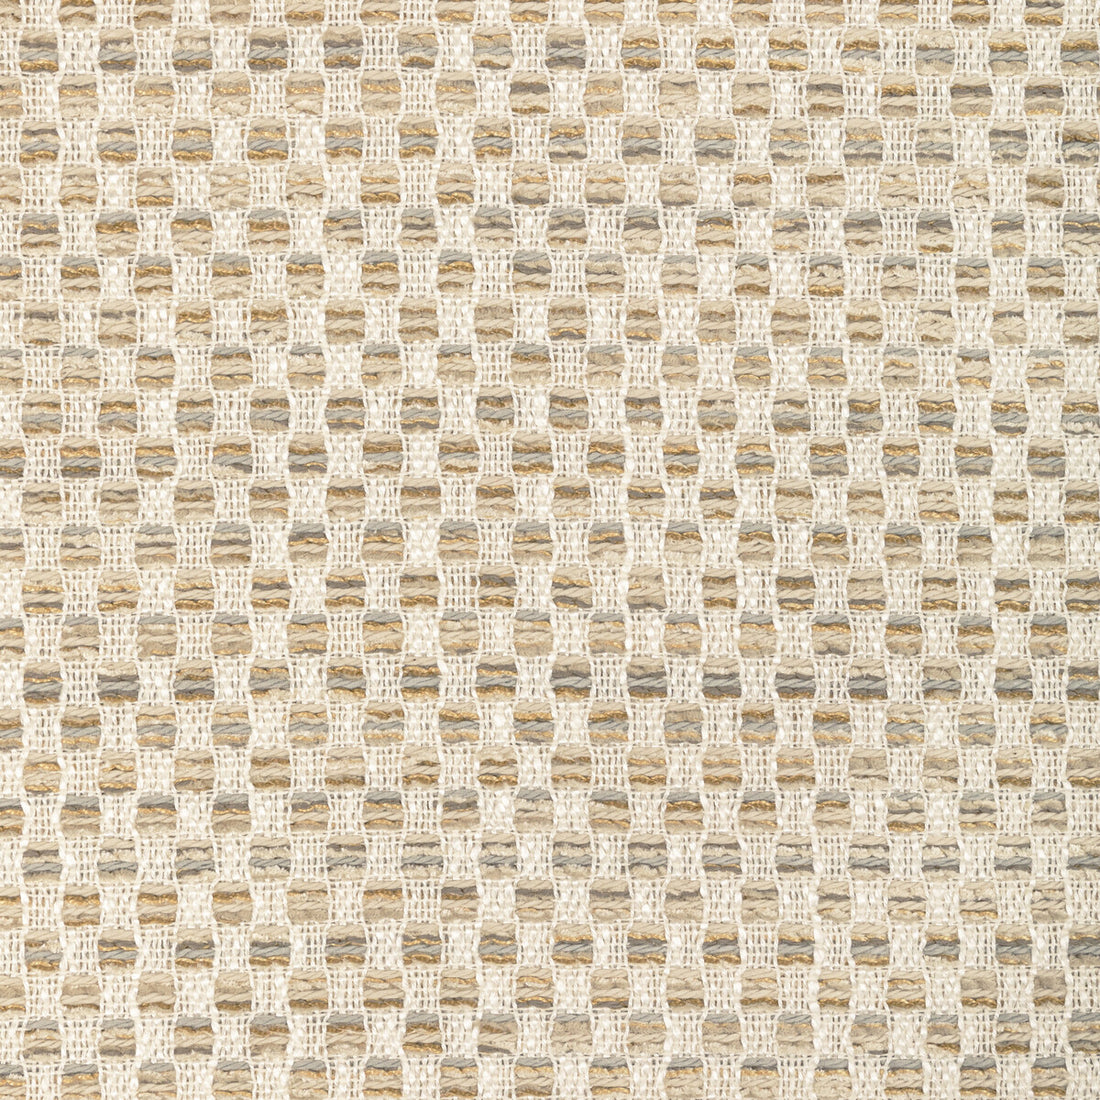 Kravet Design fabric in 36410-161 color - pattern 36410.161.0 - by Kravet Design in the Performance Crypton Home collection